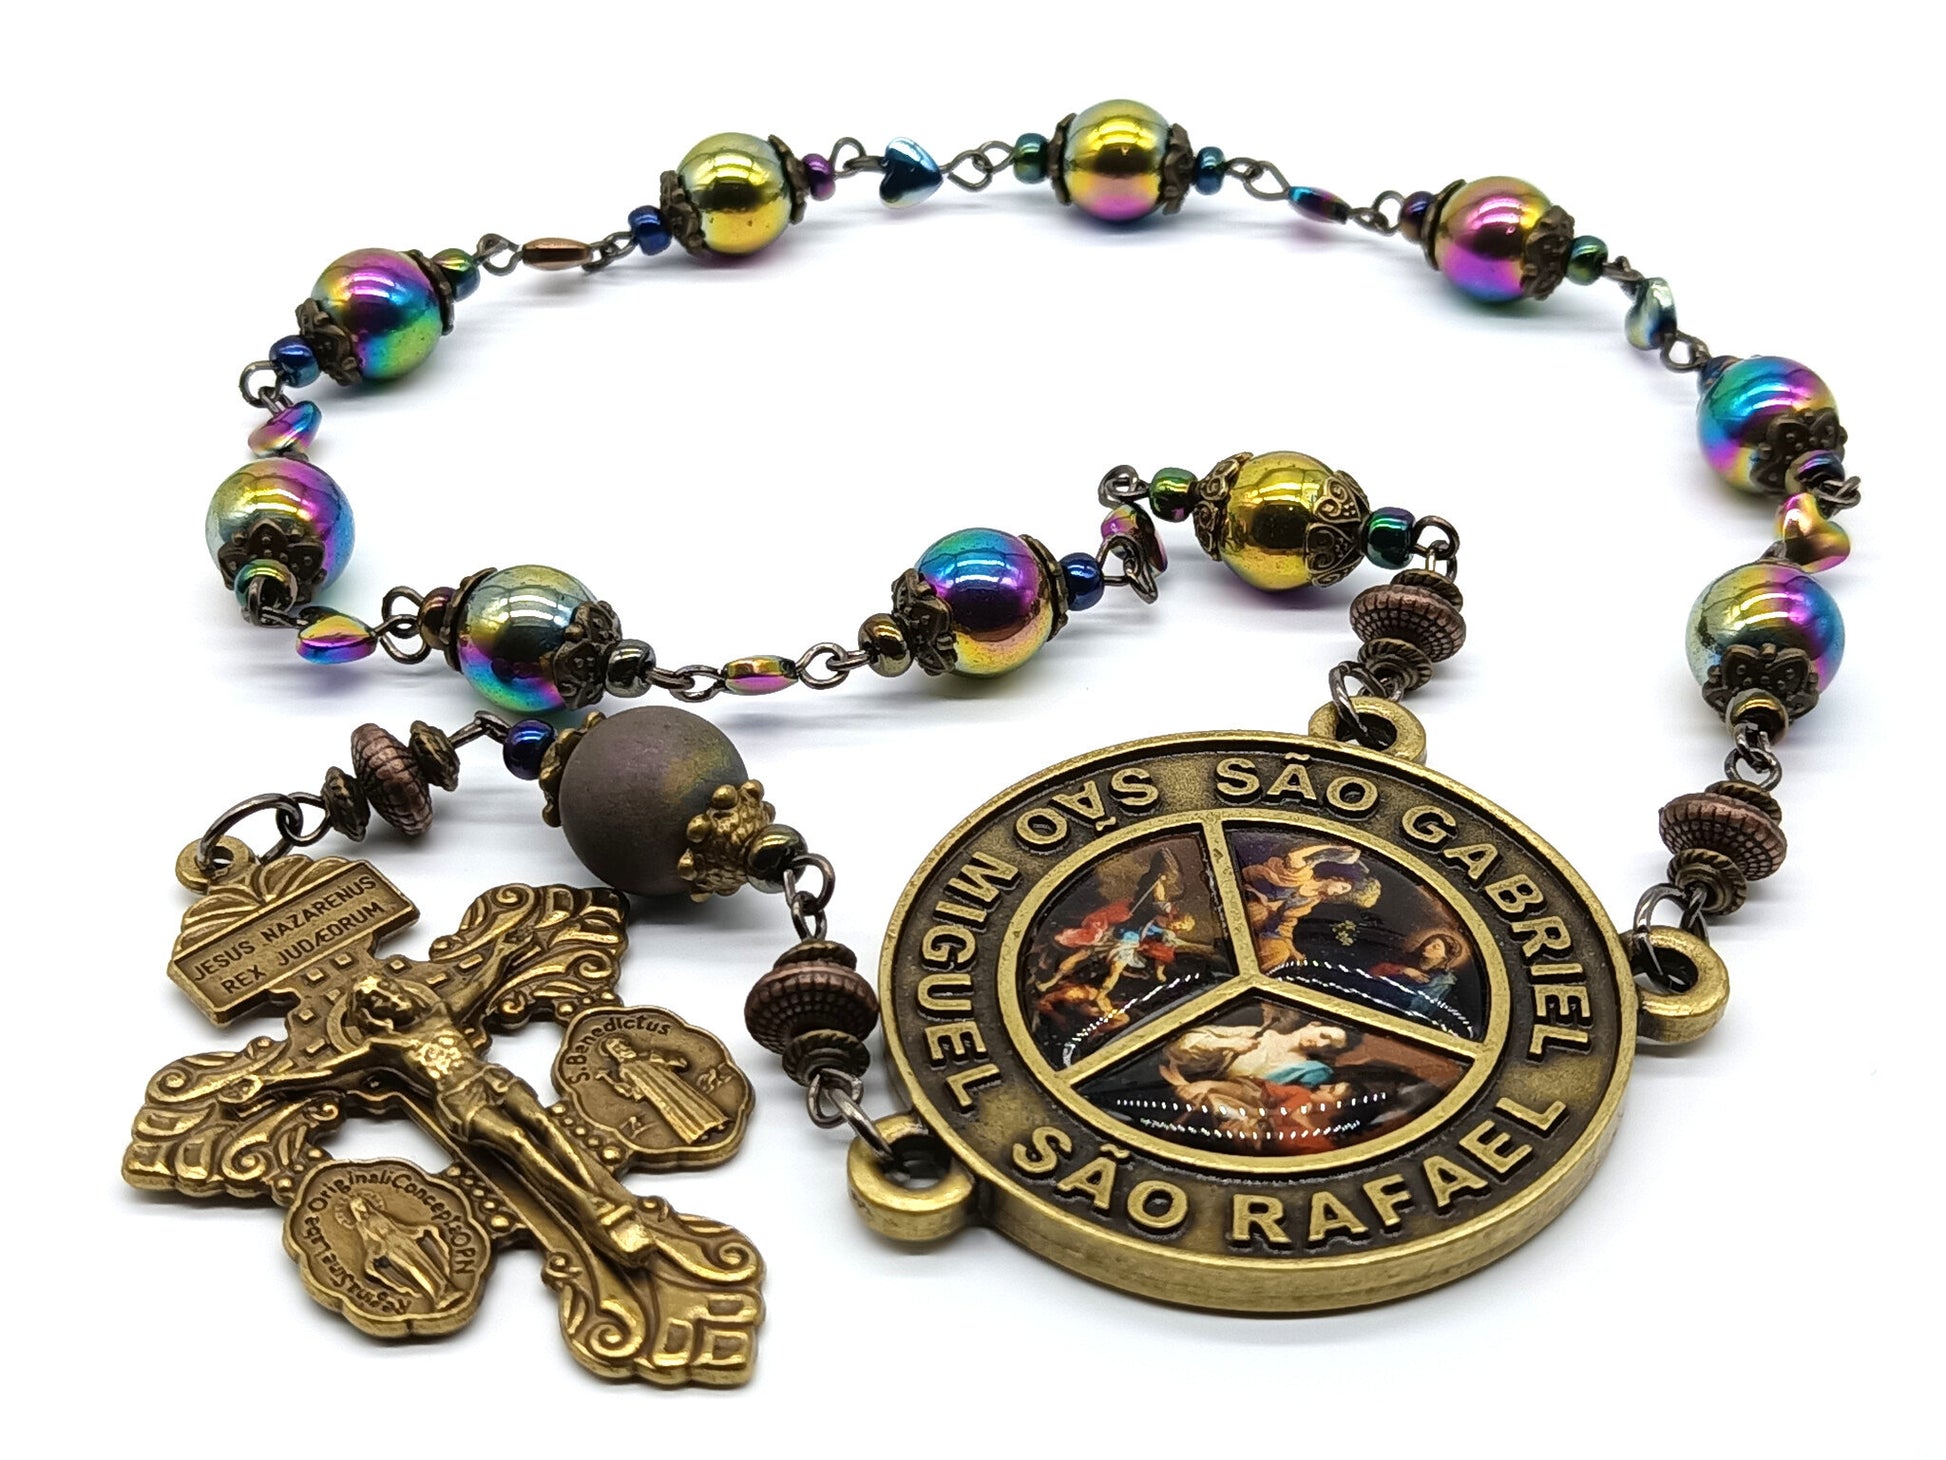 Arch Angels unique rosary beads single decade with petrol hematite beads, bronze pardon crucifix and picture centre medal.